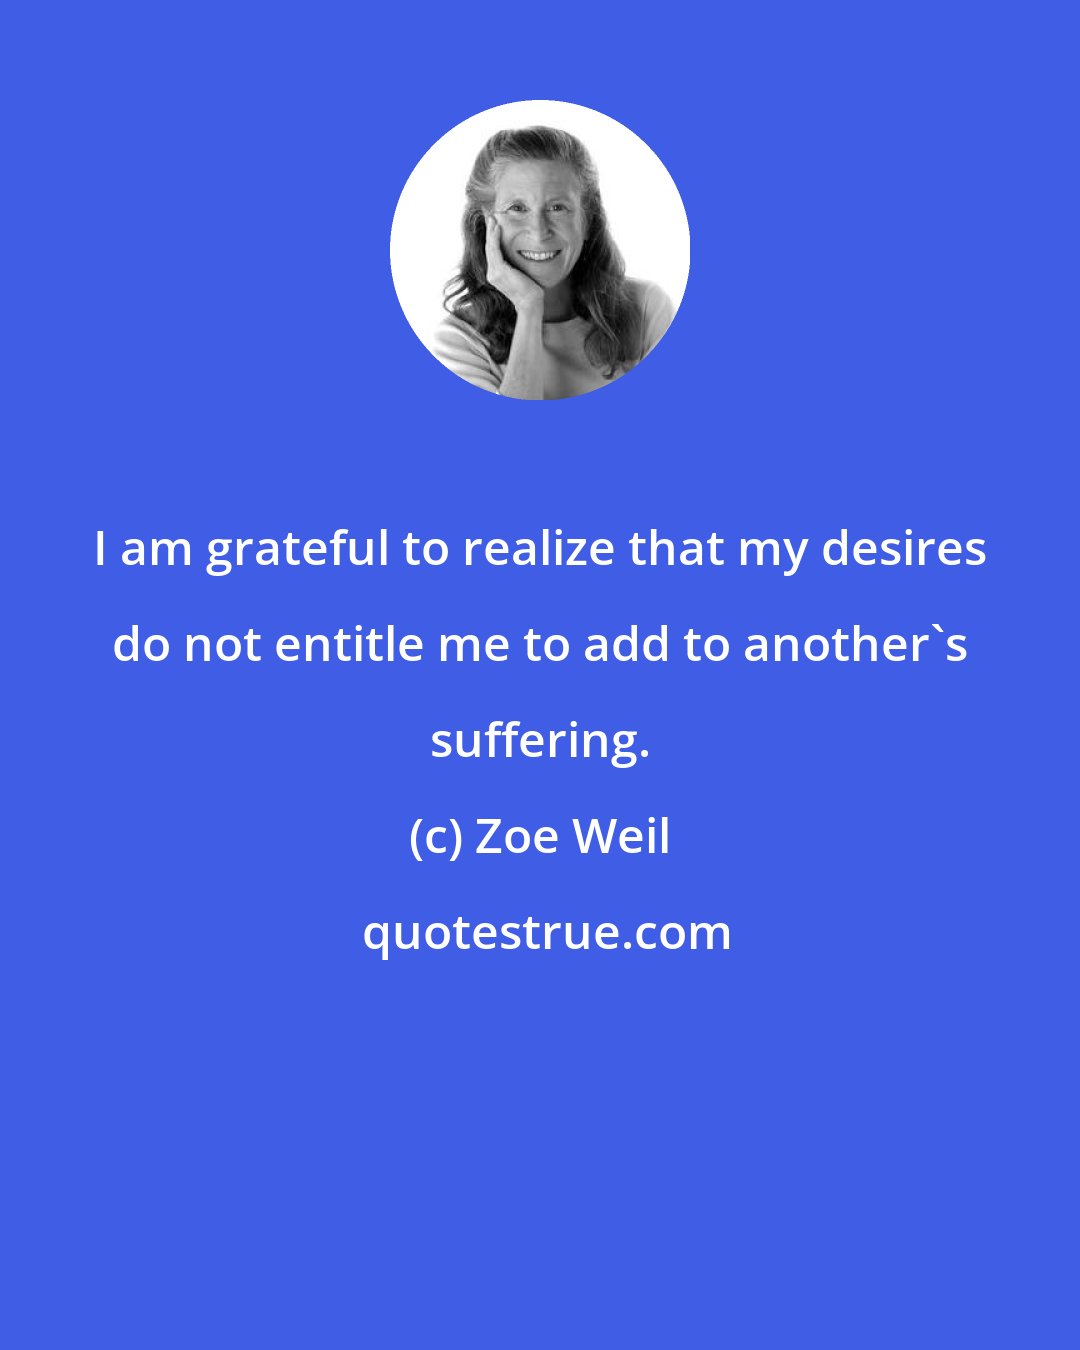 Zoe Weil: I am grateful to realize that my desires do not entitle me to add to another's suffering.